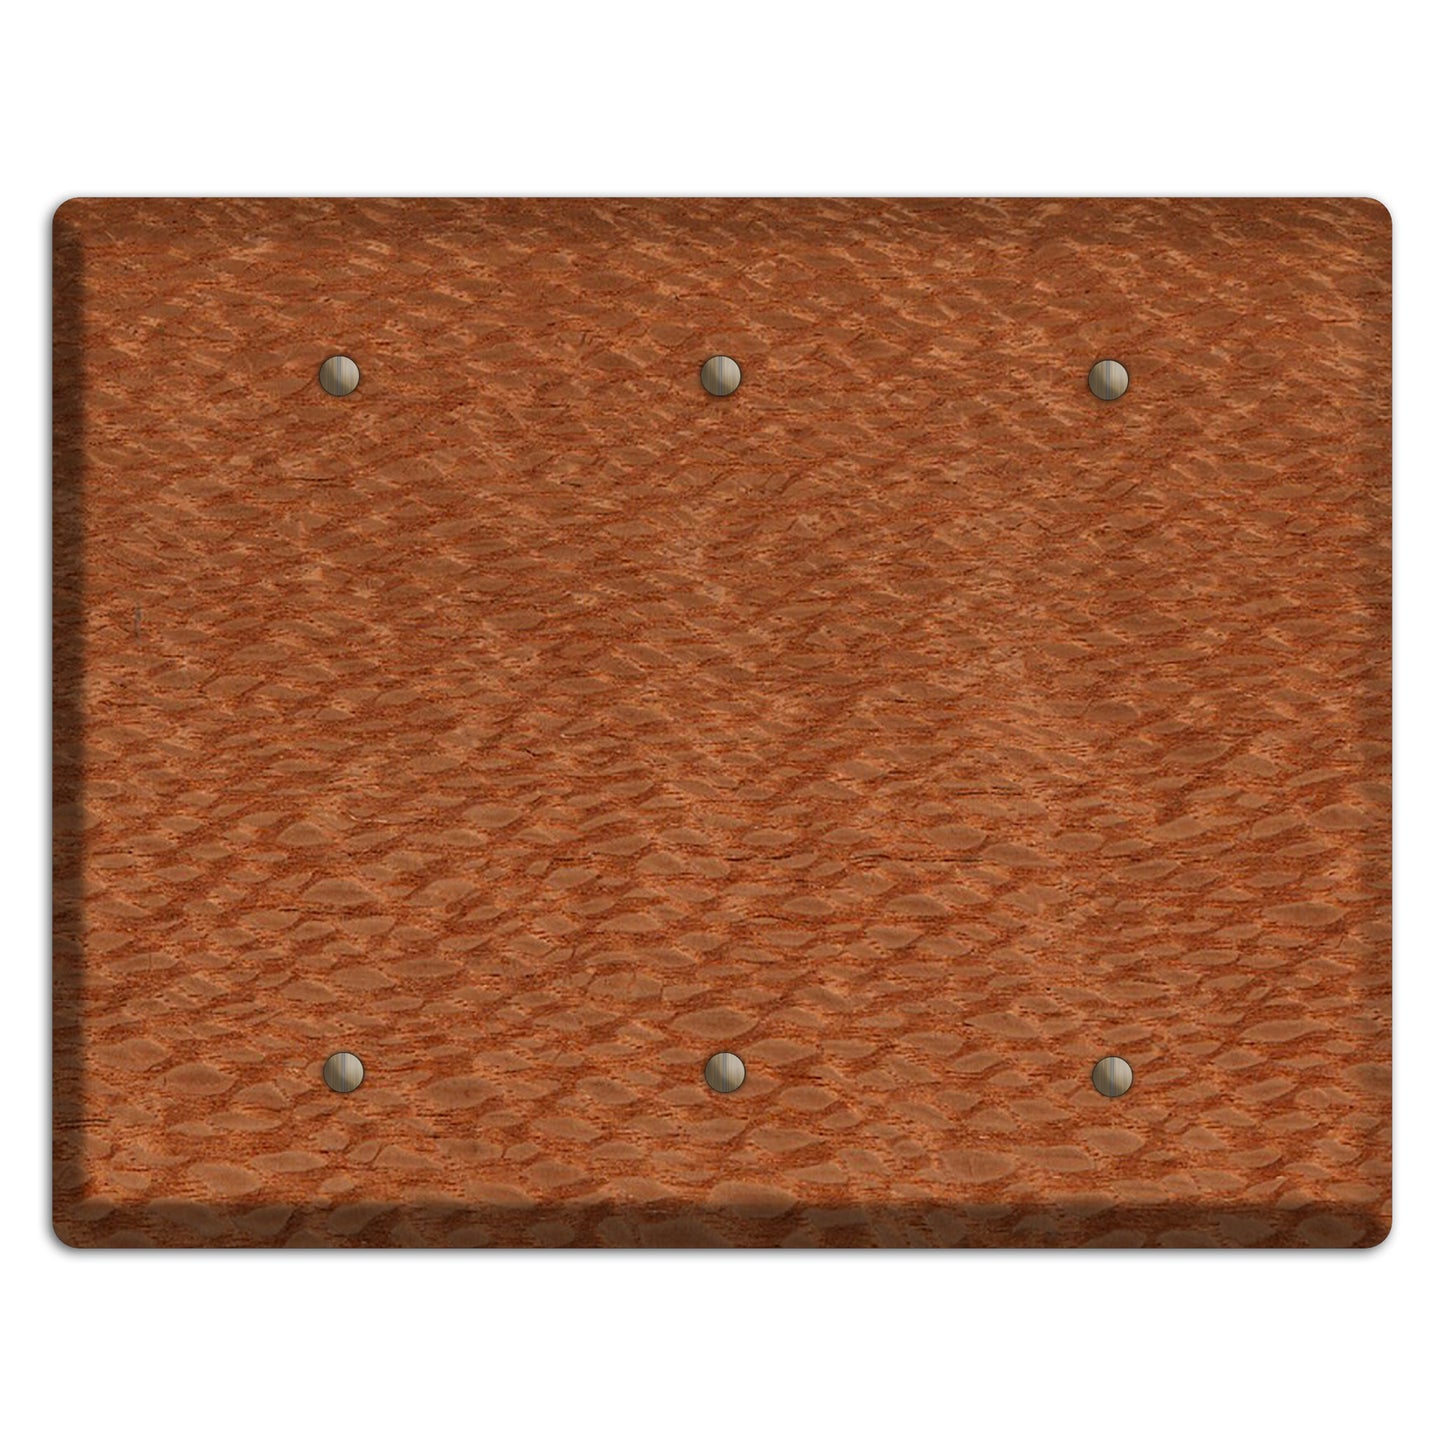 Lacewood Wood Triple Blank Cover Plate